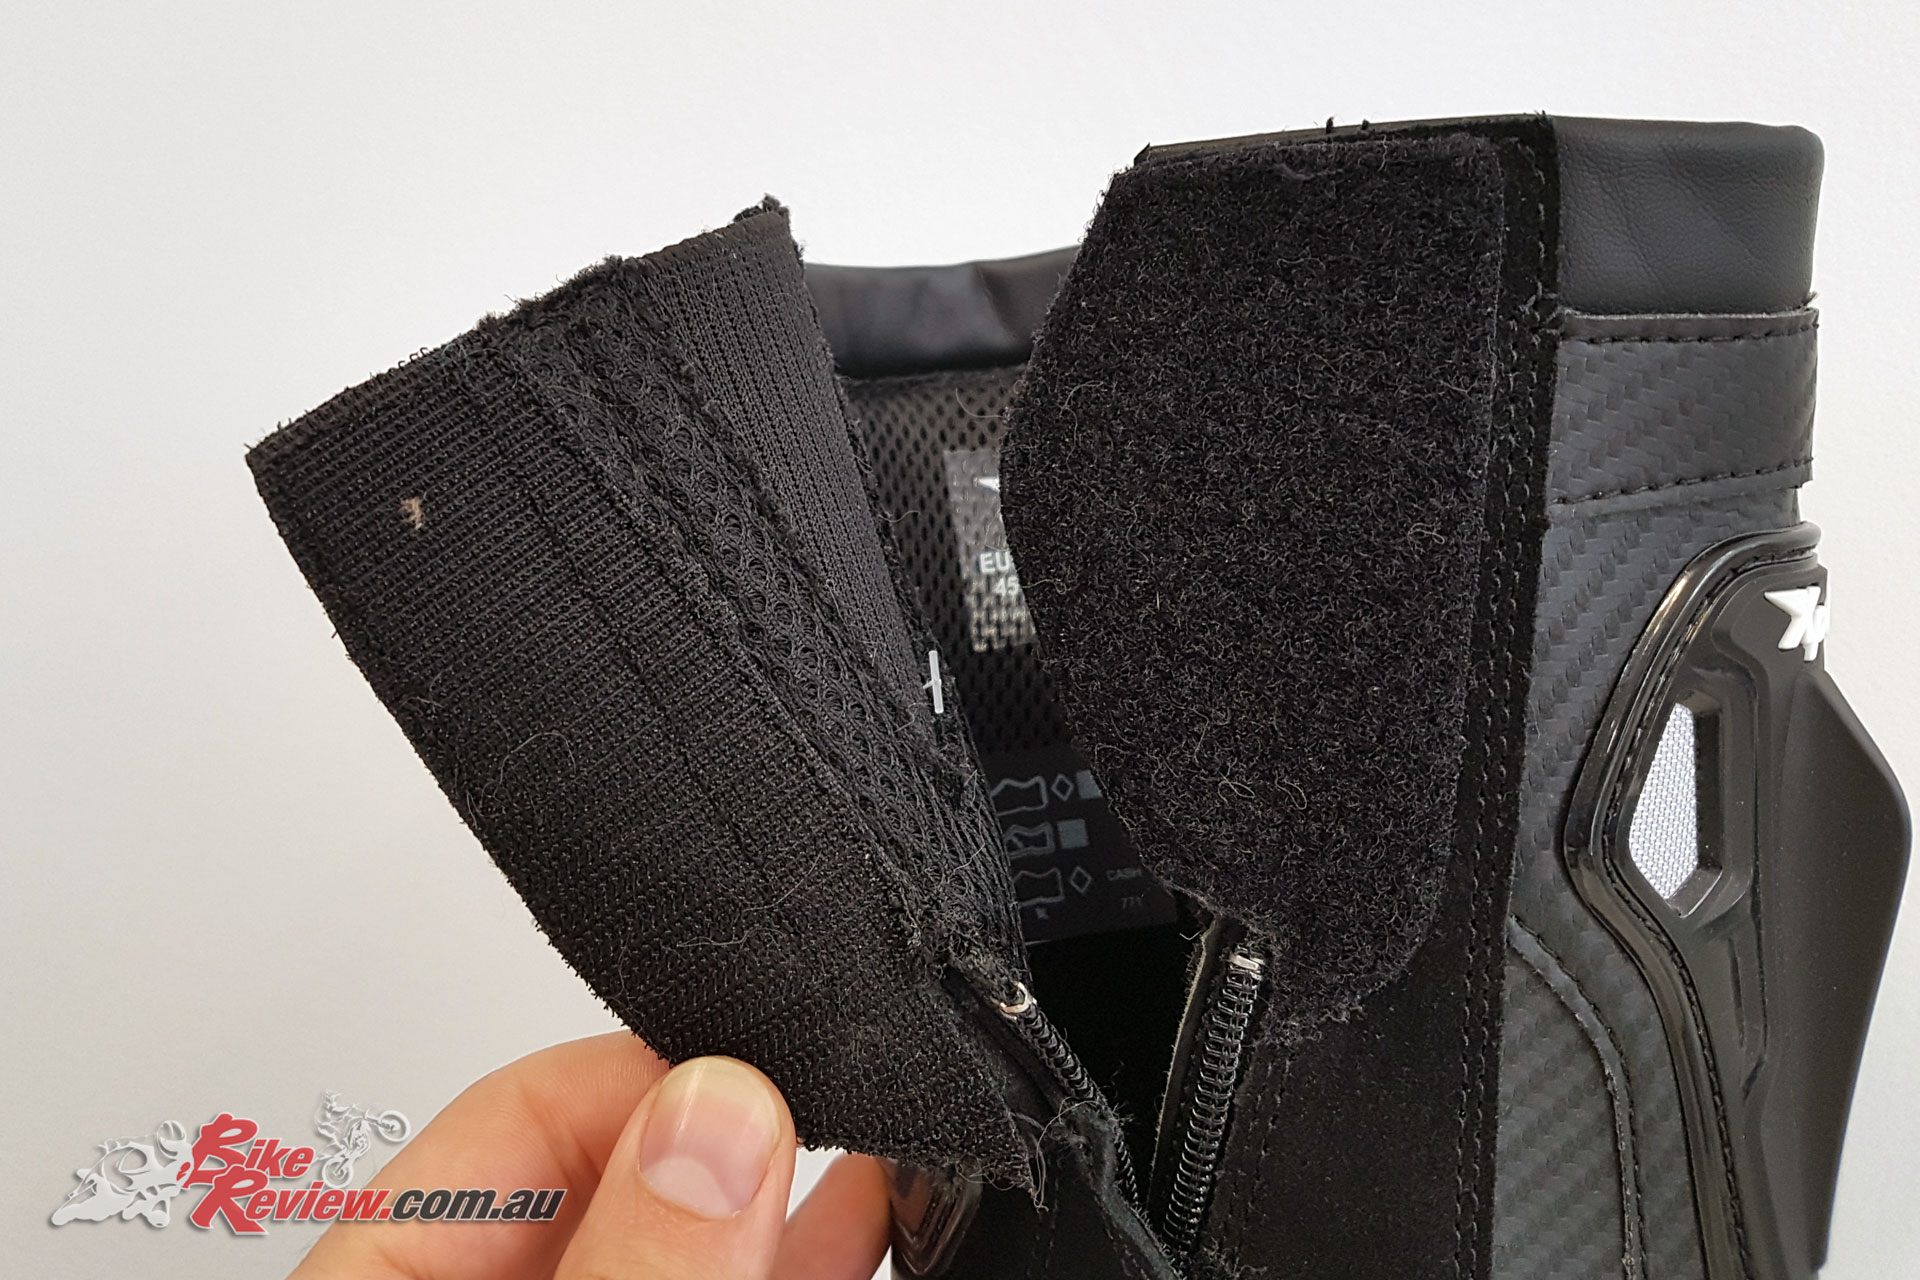 Easy velcro closures with a zip ensure a good secure fit, without sacrificing comfort